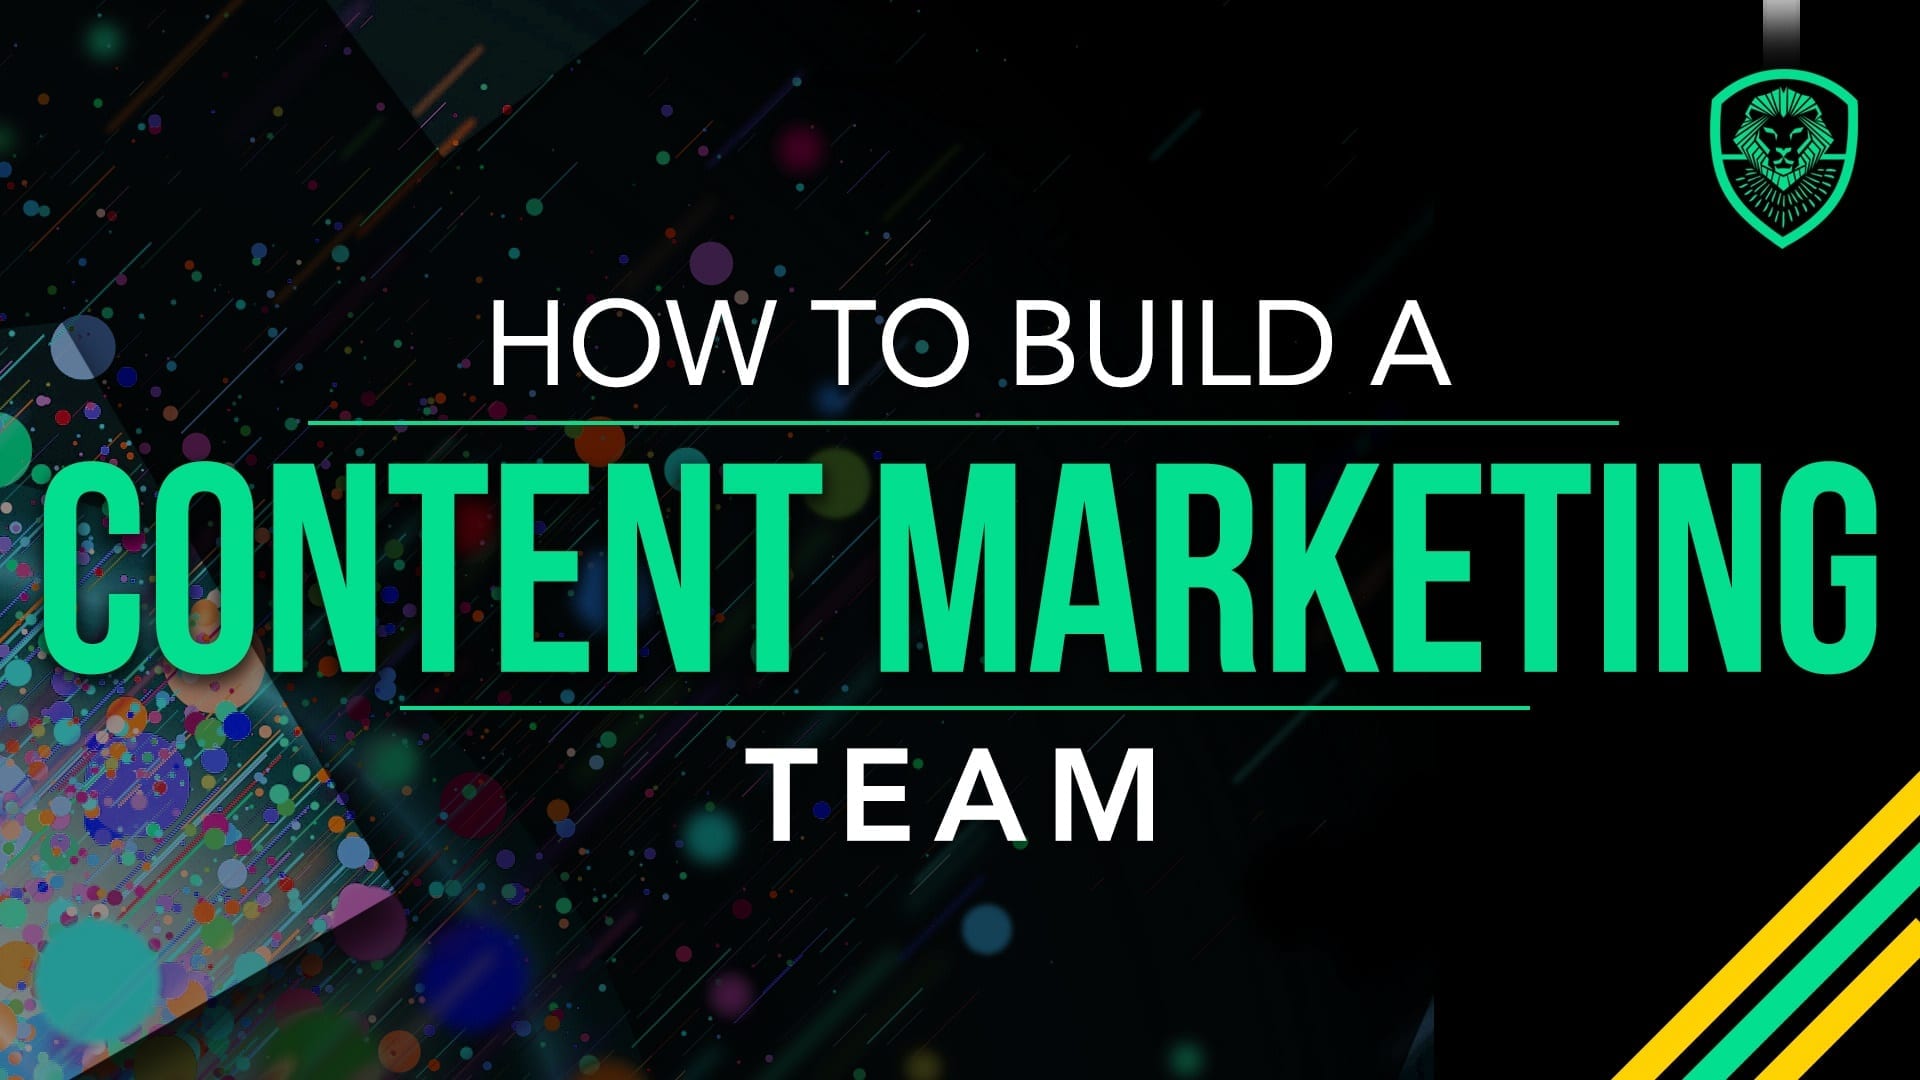 Want to use content to market your business? Don't do it alone! Here's how to build a content marketing team so your efforts will be more successful.